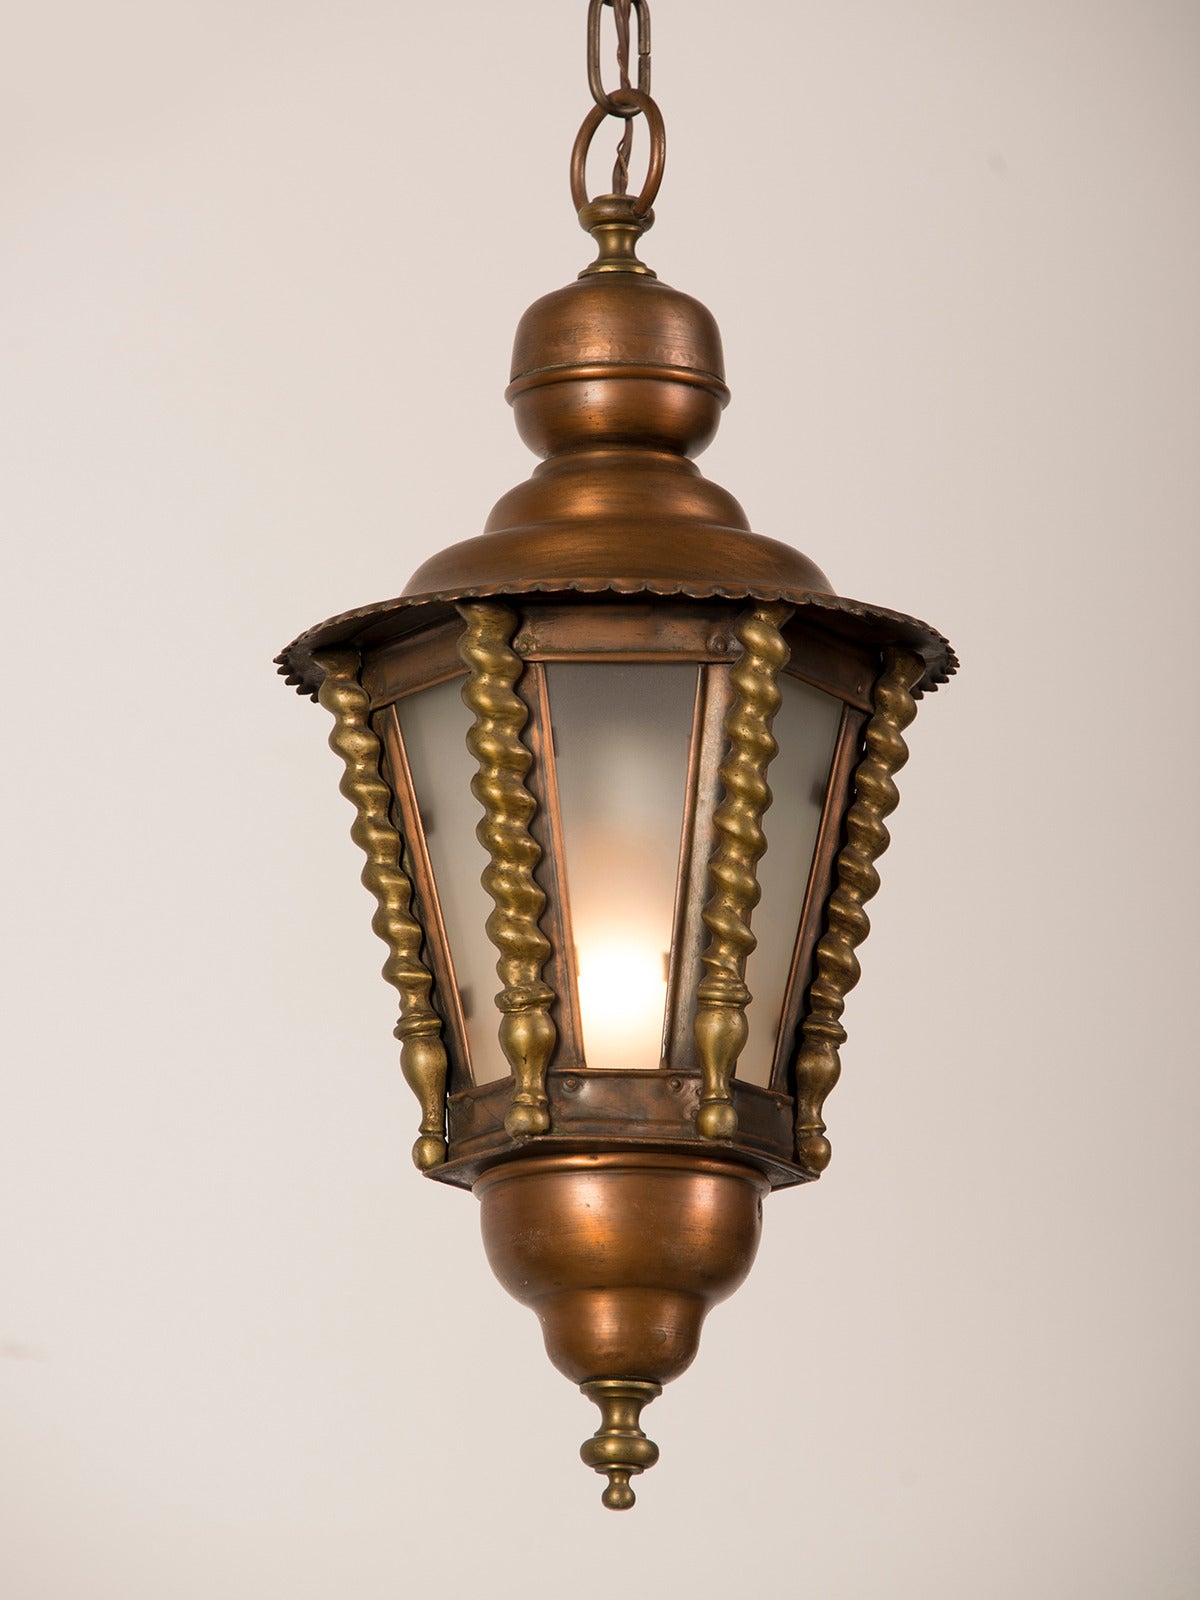 French Brass and Copper Hall Lantern from France circa 1920